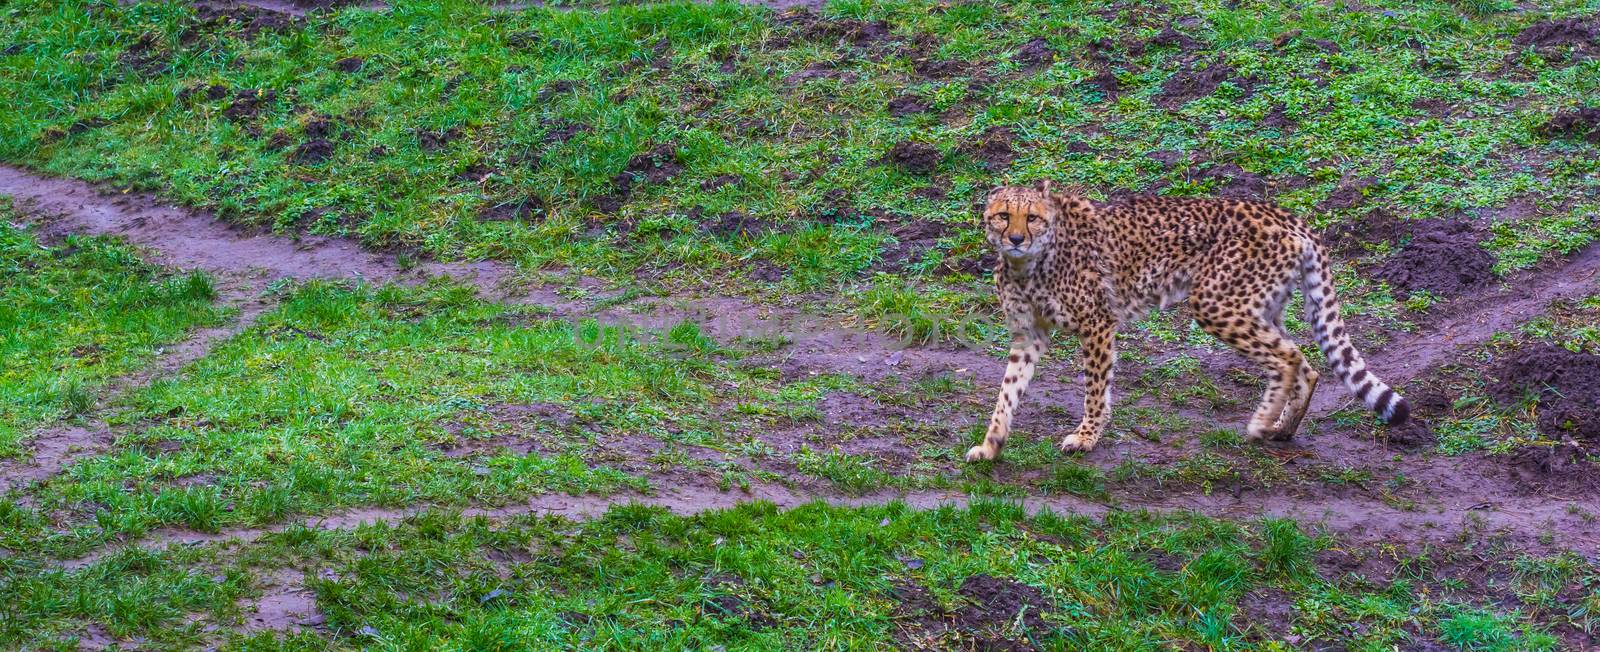 cheetah walking in a pasture and looking towards the camera, threatened cat specie from Africa by charlottebleijenberg